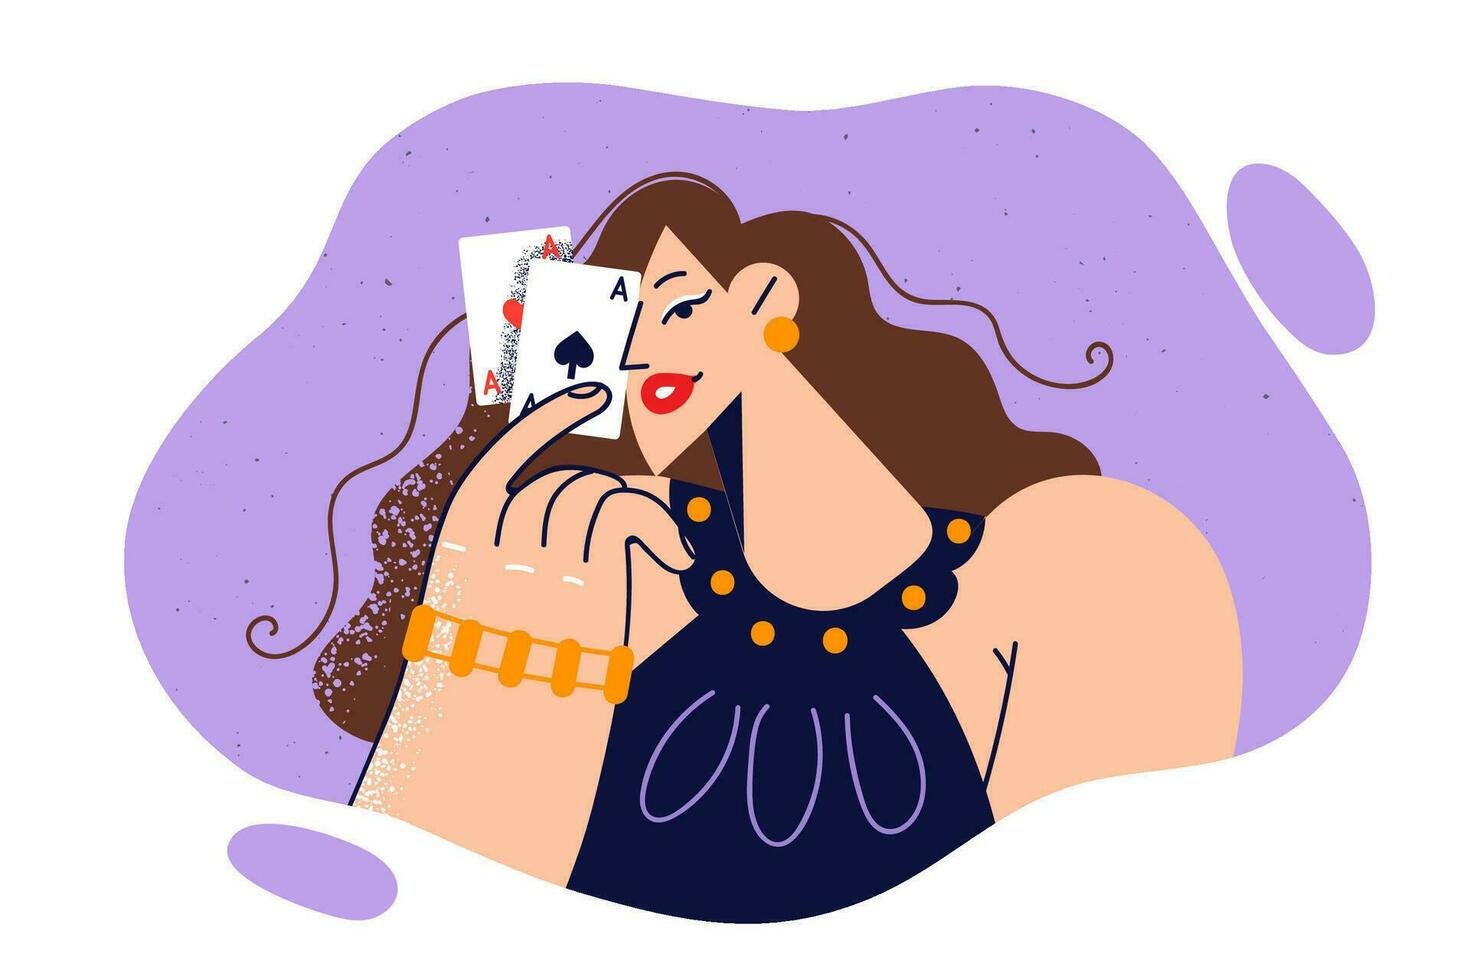 Woman with two cards plays blackjack and demonstrates winning combination of aces that allows to pick up cash prize. Mysterious girl invites to play and try luck at blackjack or poker vector